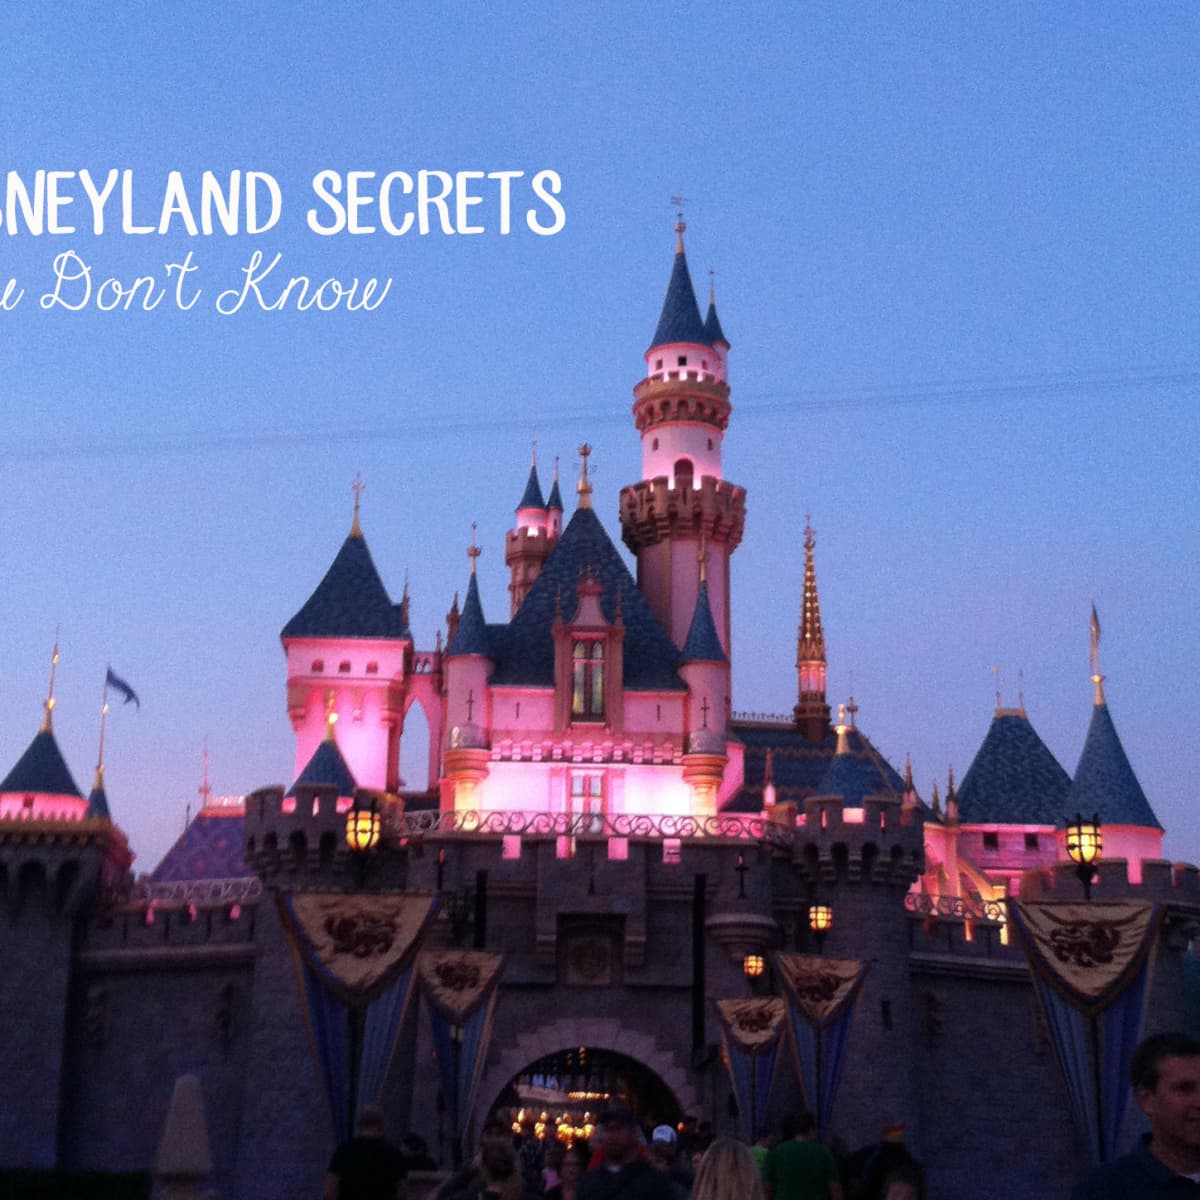 Disneyland Paris: 5 secrets you've always wanted to know about the park